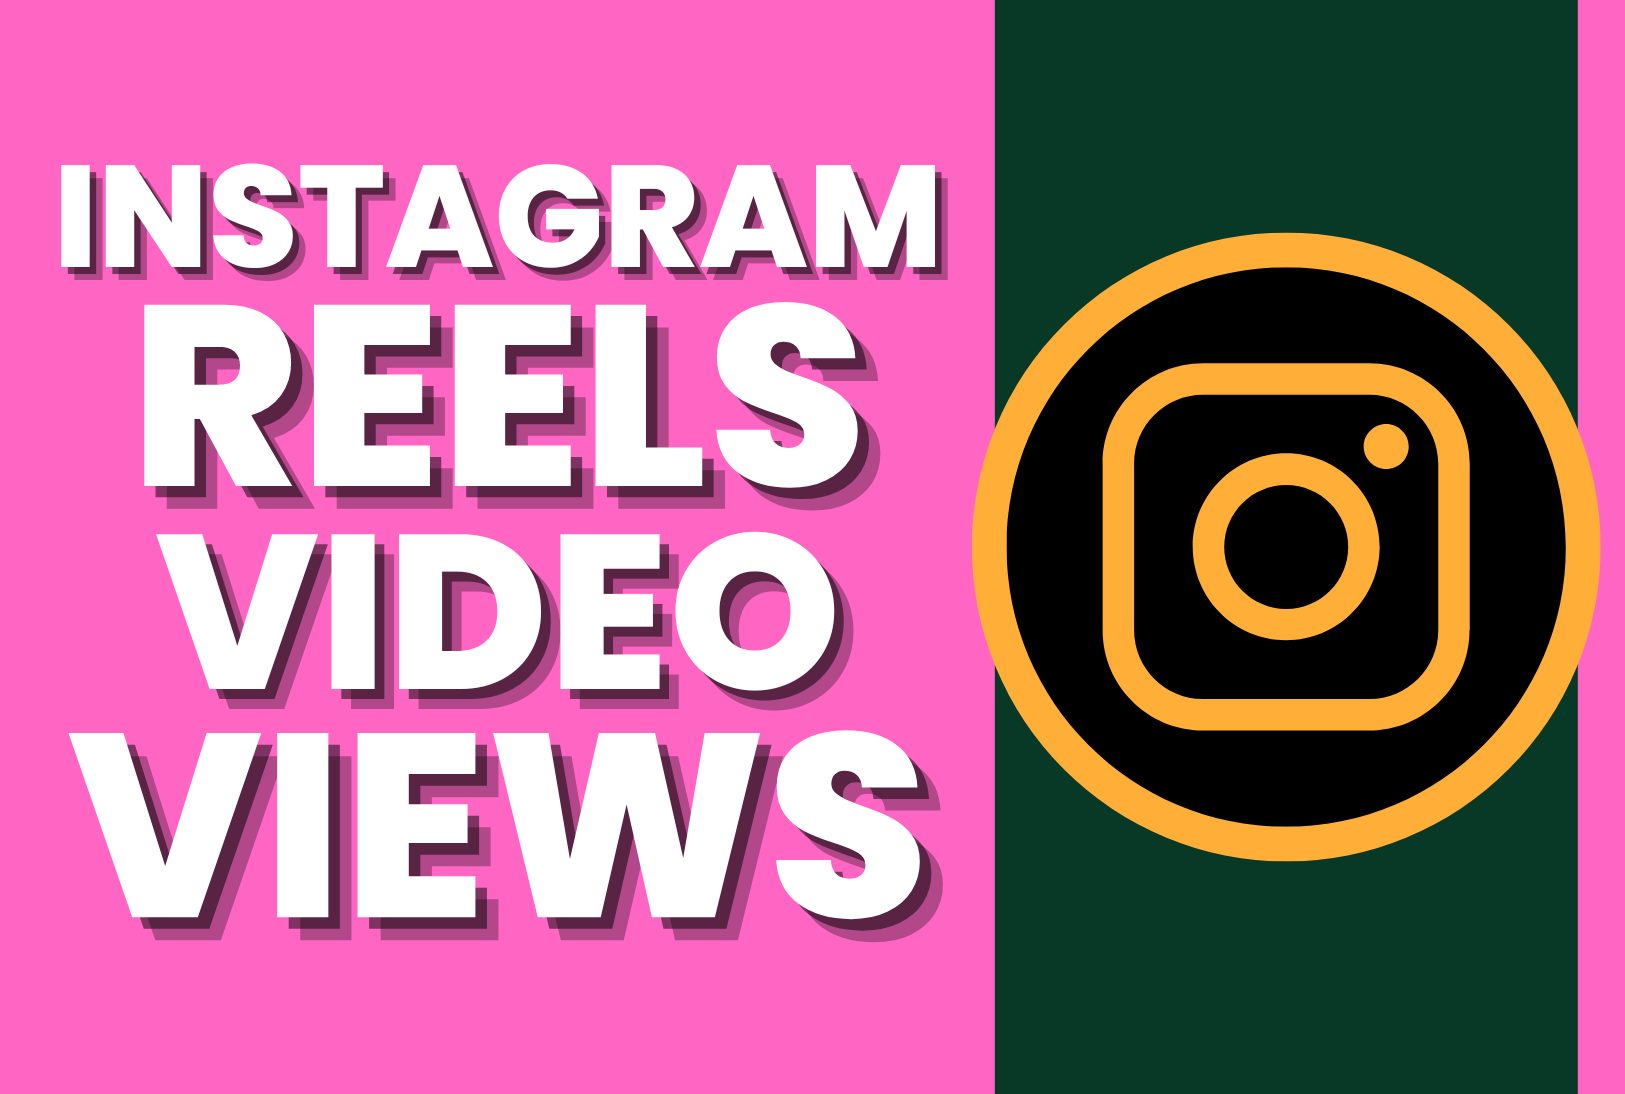 1000 Views on the REELS Instagram video, Instagram post promotion and engagement